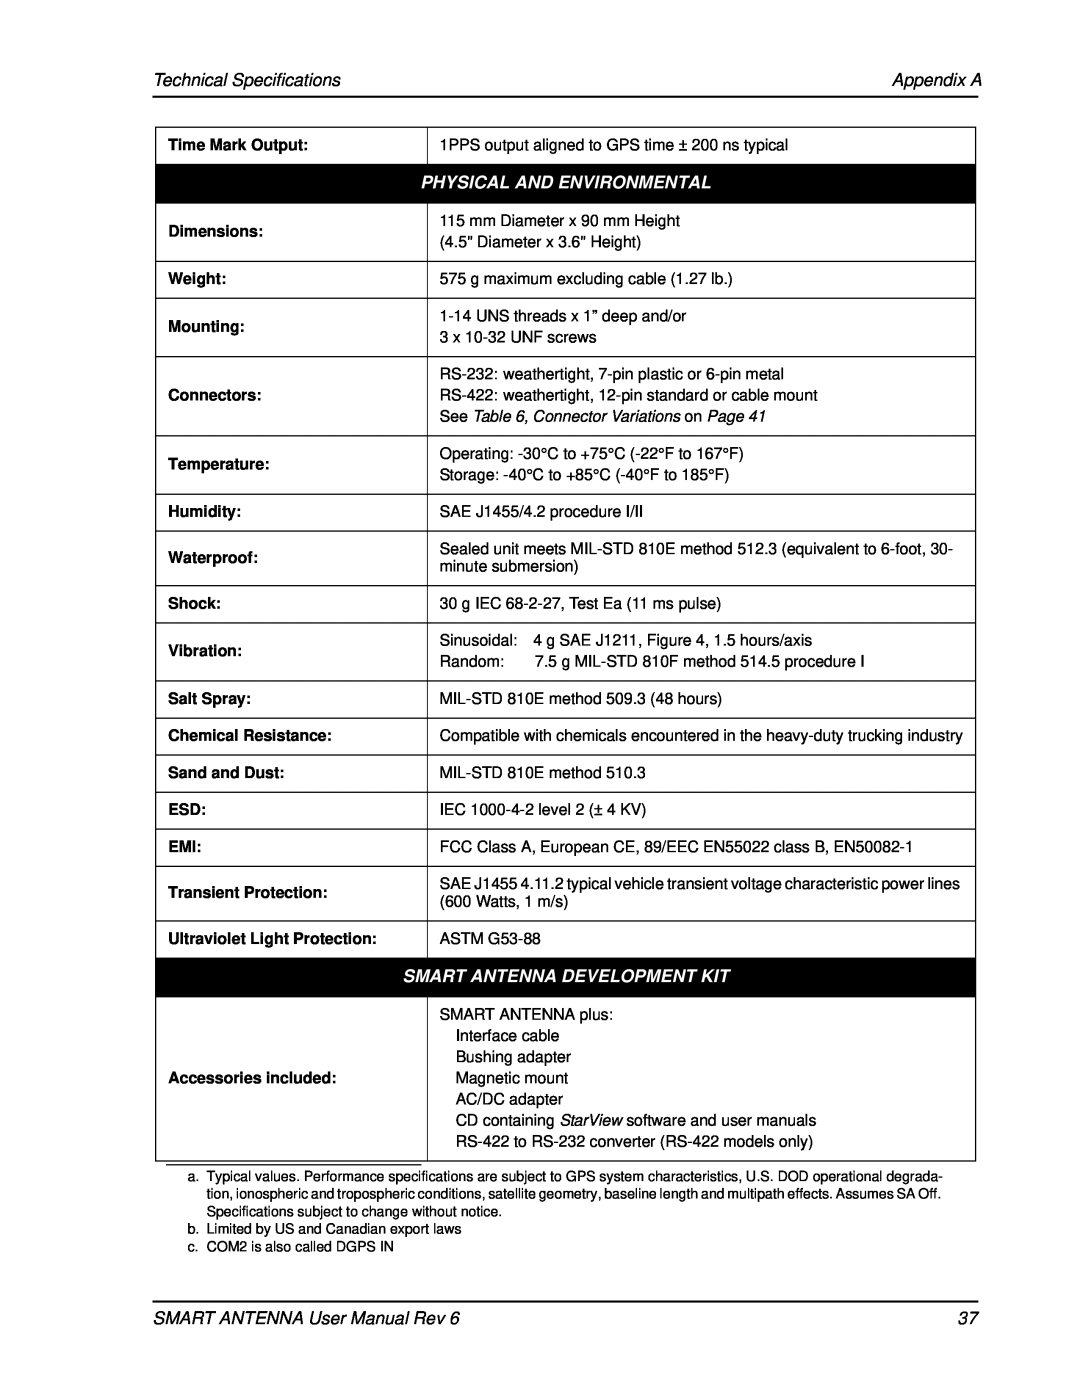 Novatel SMART ANTENNA Technical Specifications, Appendix A, Physical And Environmental, Smart Antenna Development Kit 